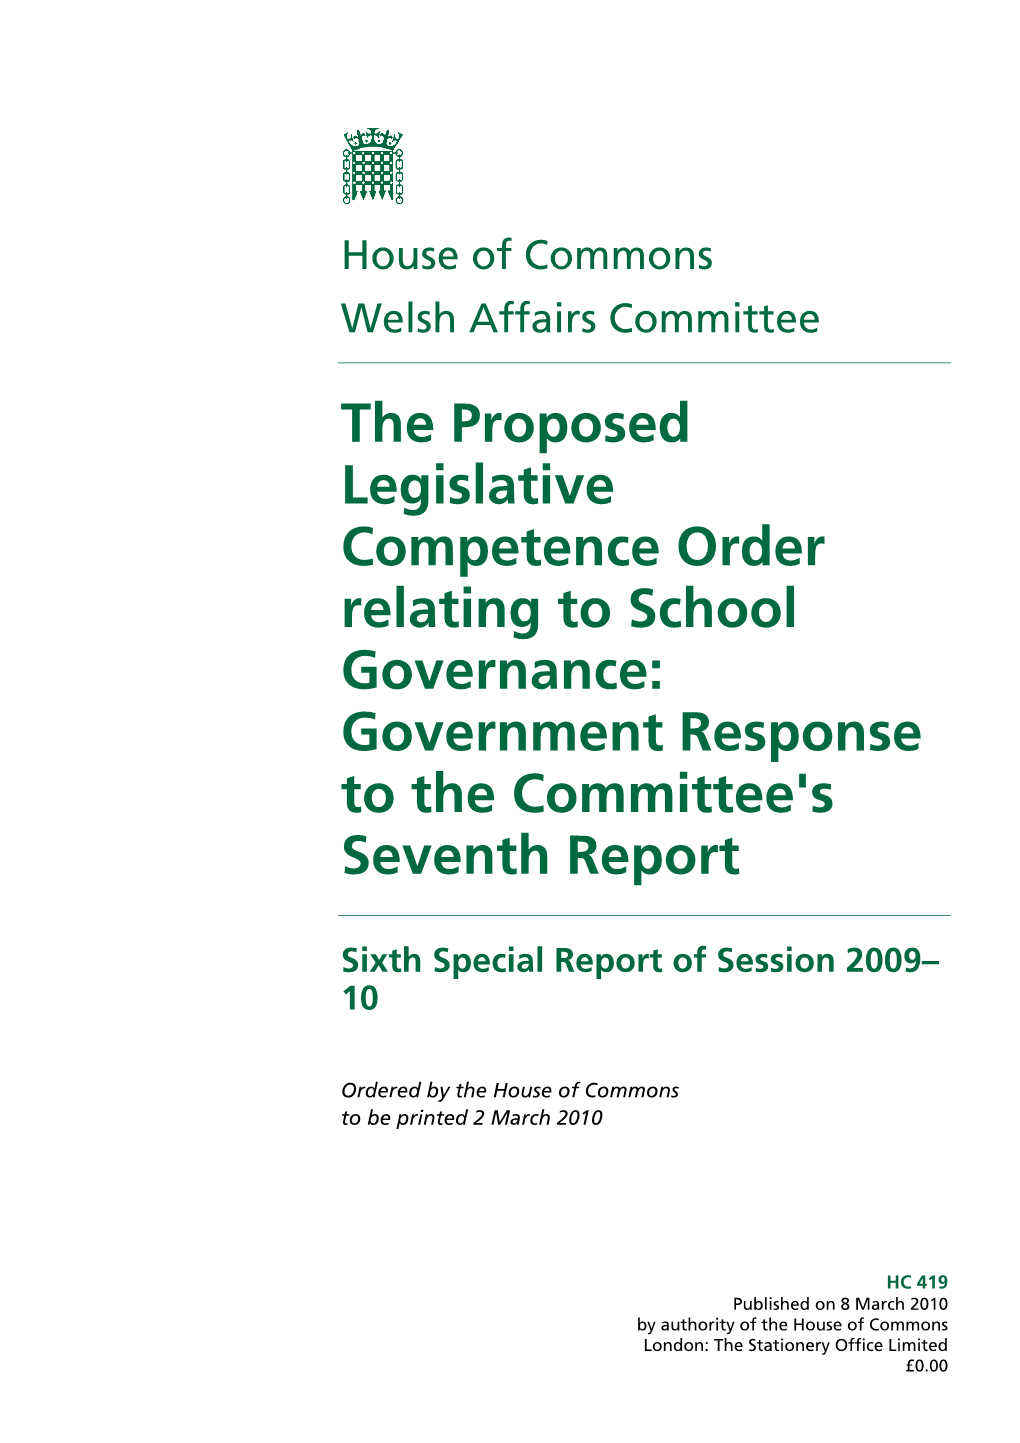 Legislative Competence Order Relating to School Governance: Government Response to the Committee's Seventh Report